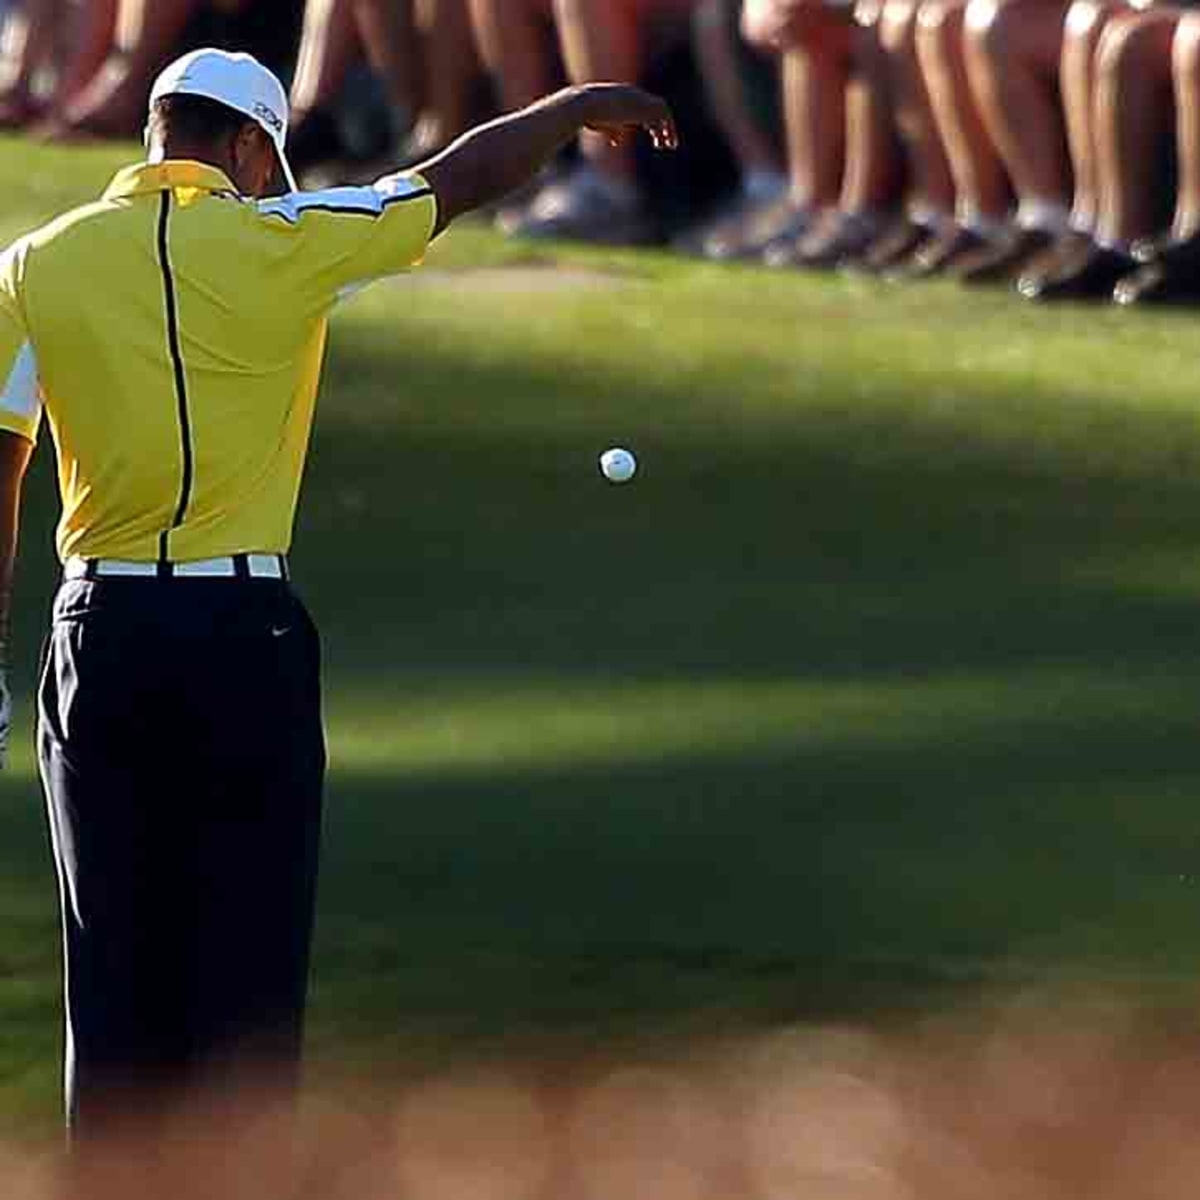 He is the greatest soccer player” – Recalling how Tiger Woods